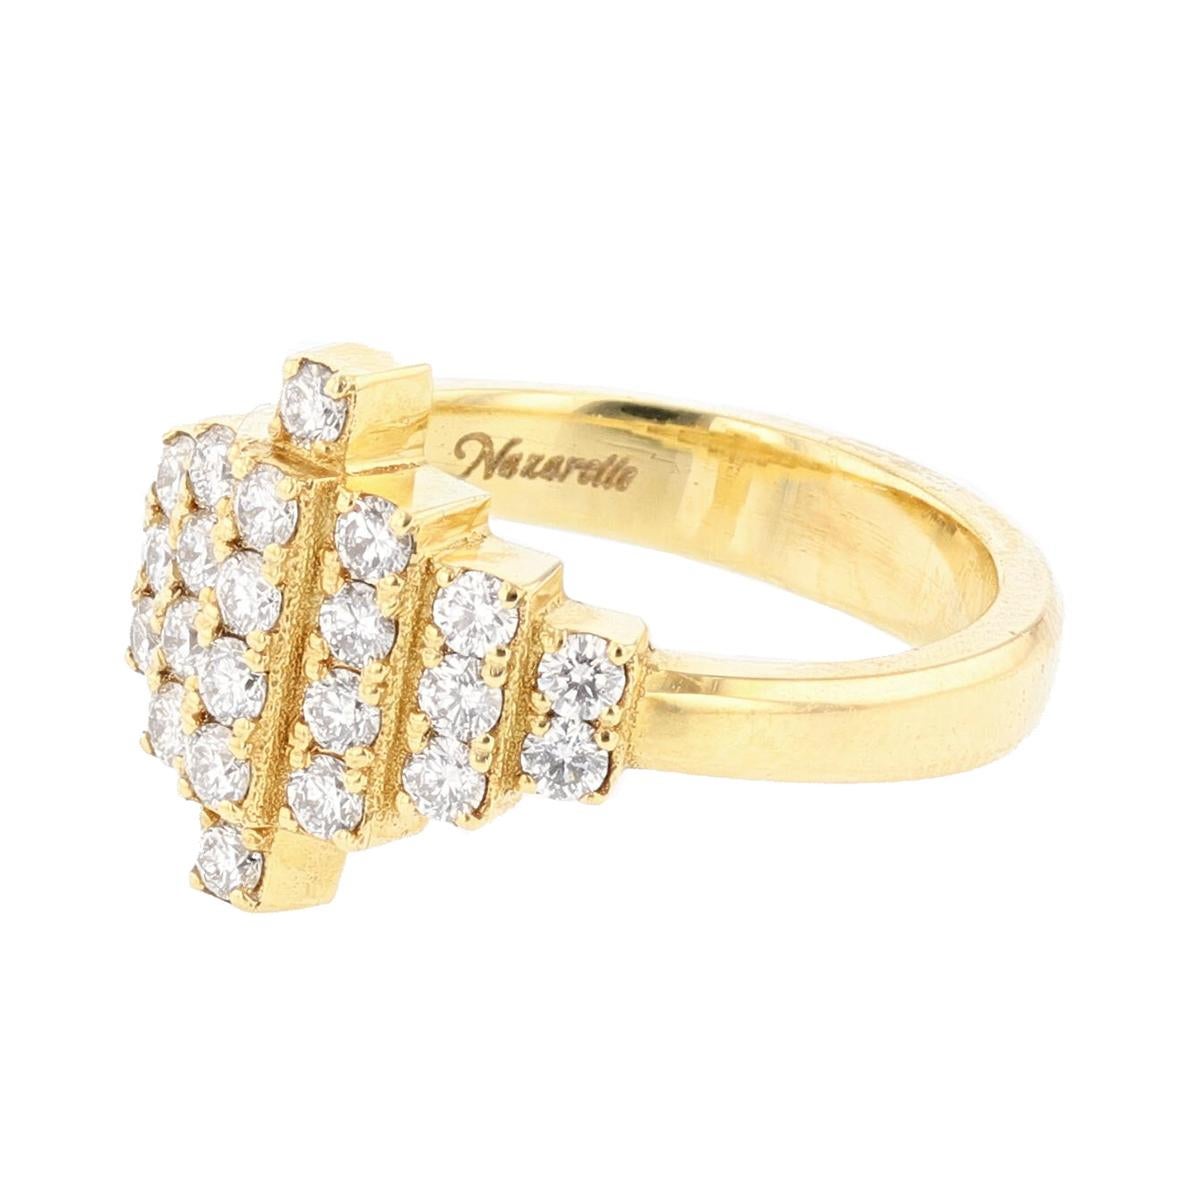 This ring is made in 18k yellow gold and features 24 round cut diamonds weighing 0.65ct with a color grade (G) and clarity grade (SI1). 